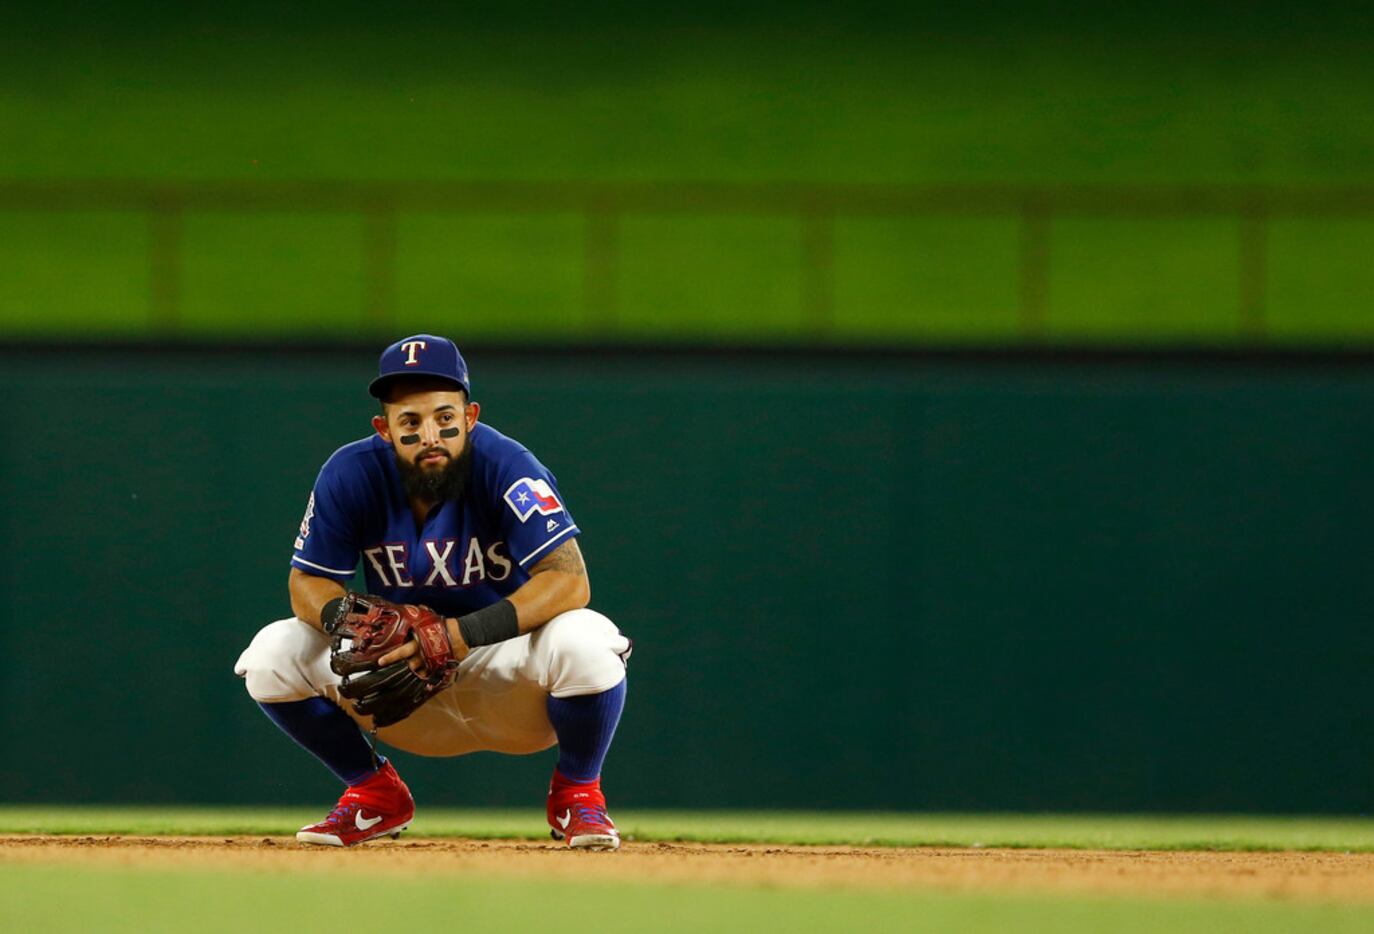 Rougned Odor on the Chemistry of the Team